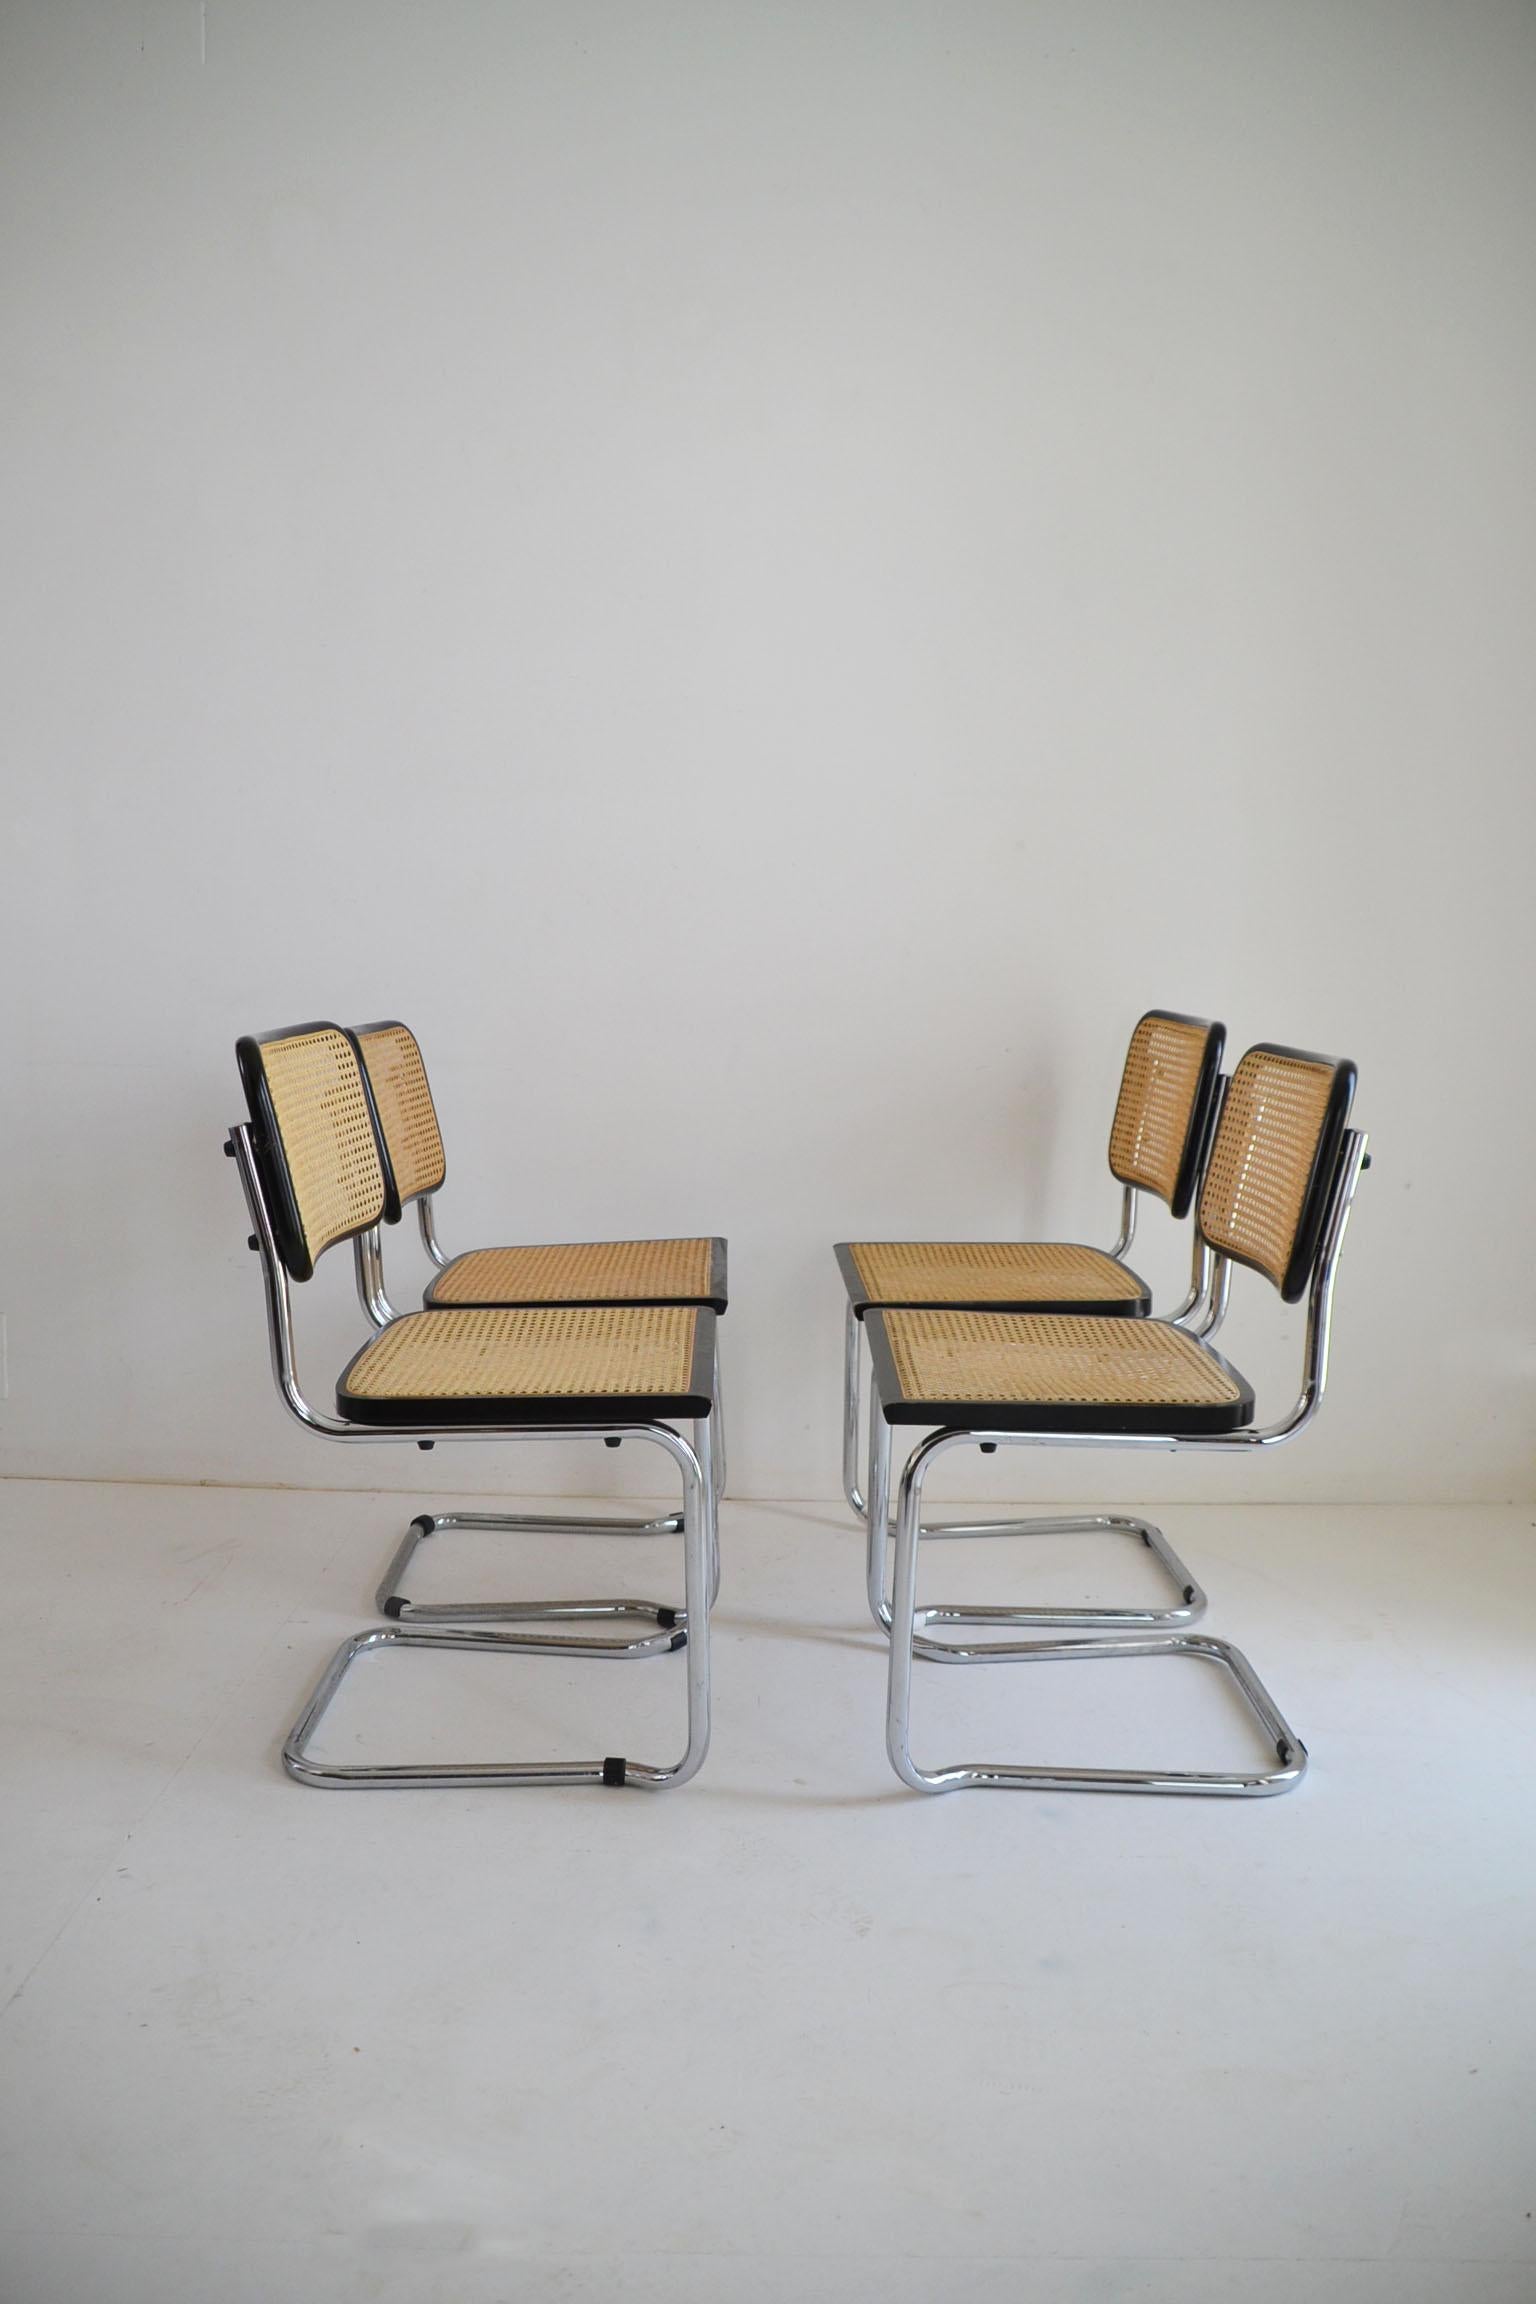 Set of six midcentury Italian Cesca Marcel Breuer B32 stackable modern chairs, 1970.
Chrome tubular structure, beechwood frames lacquered in black and Viennese natural grid.